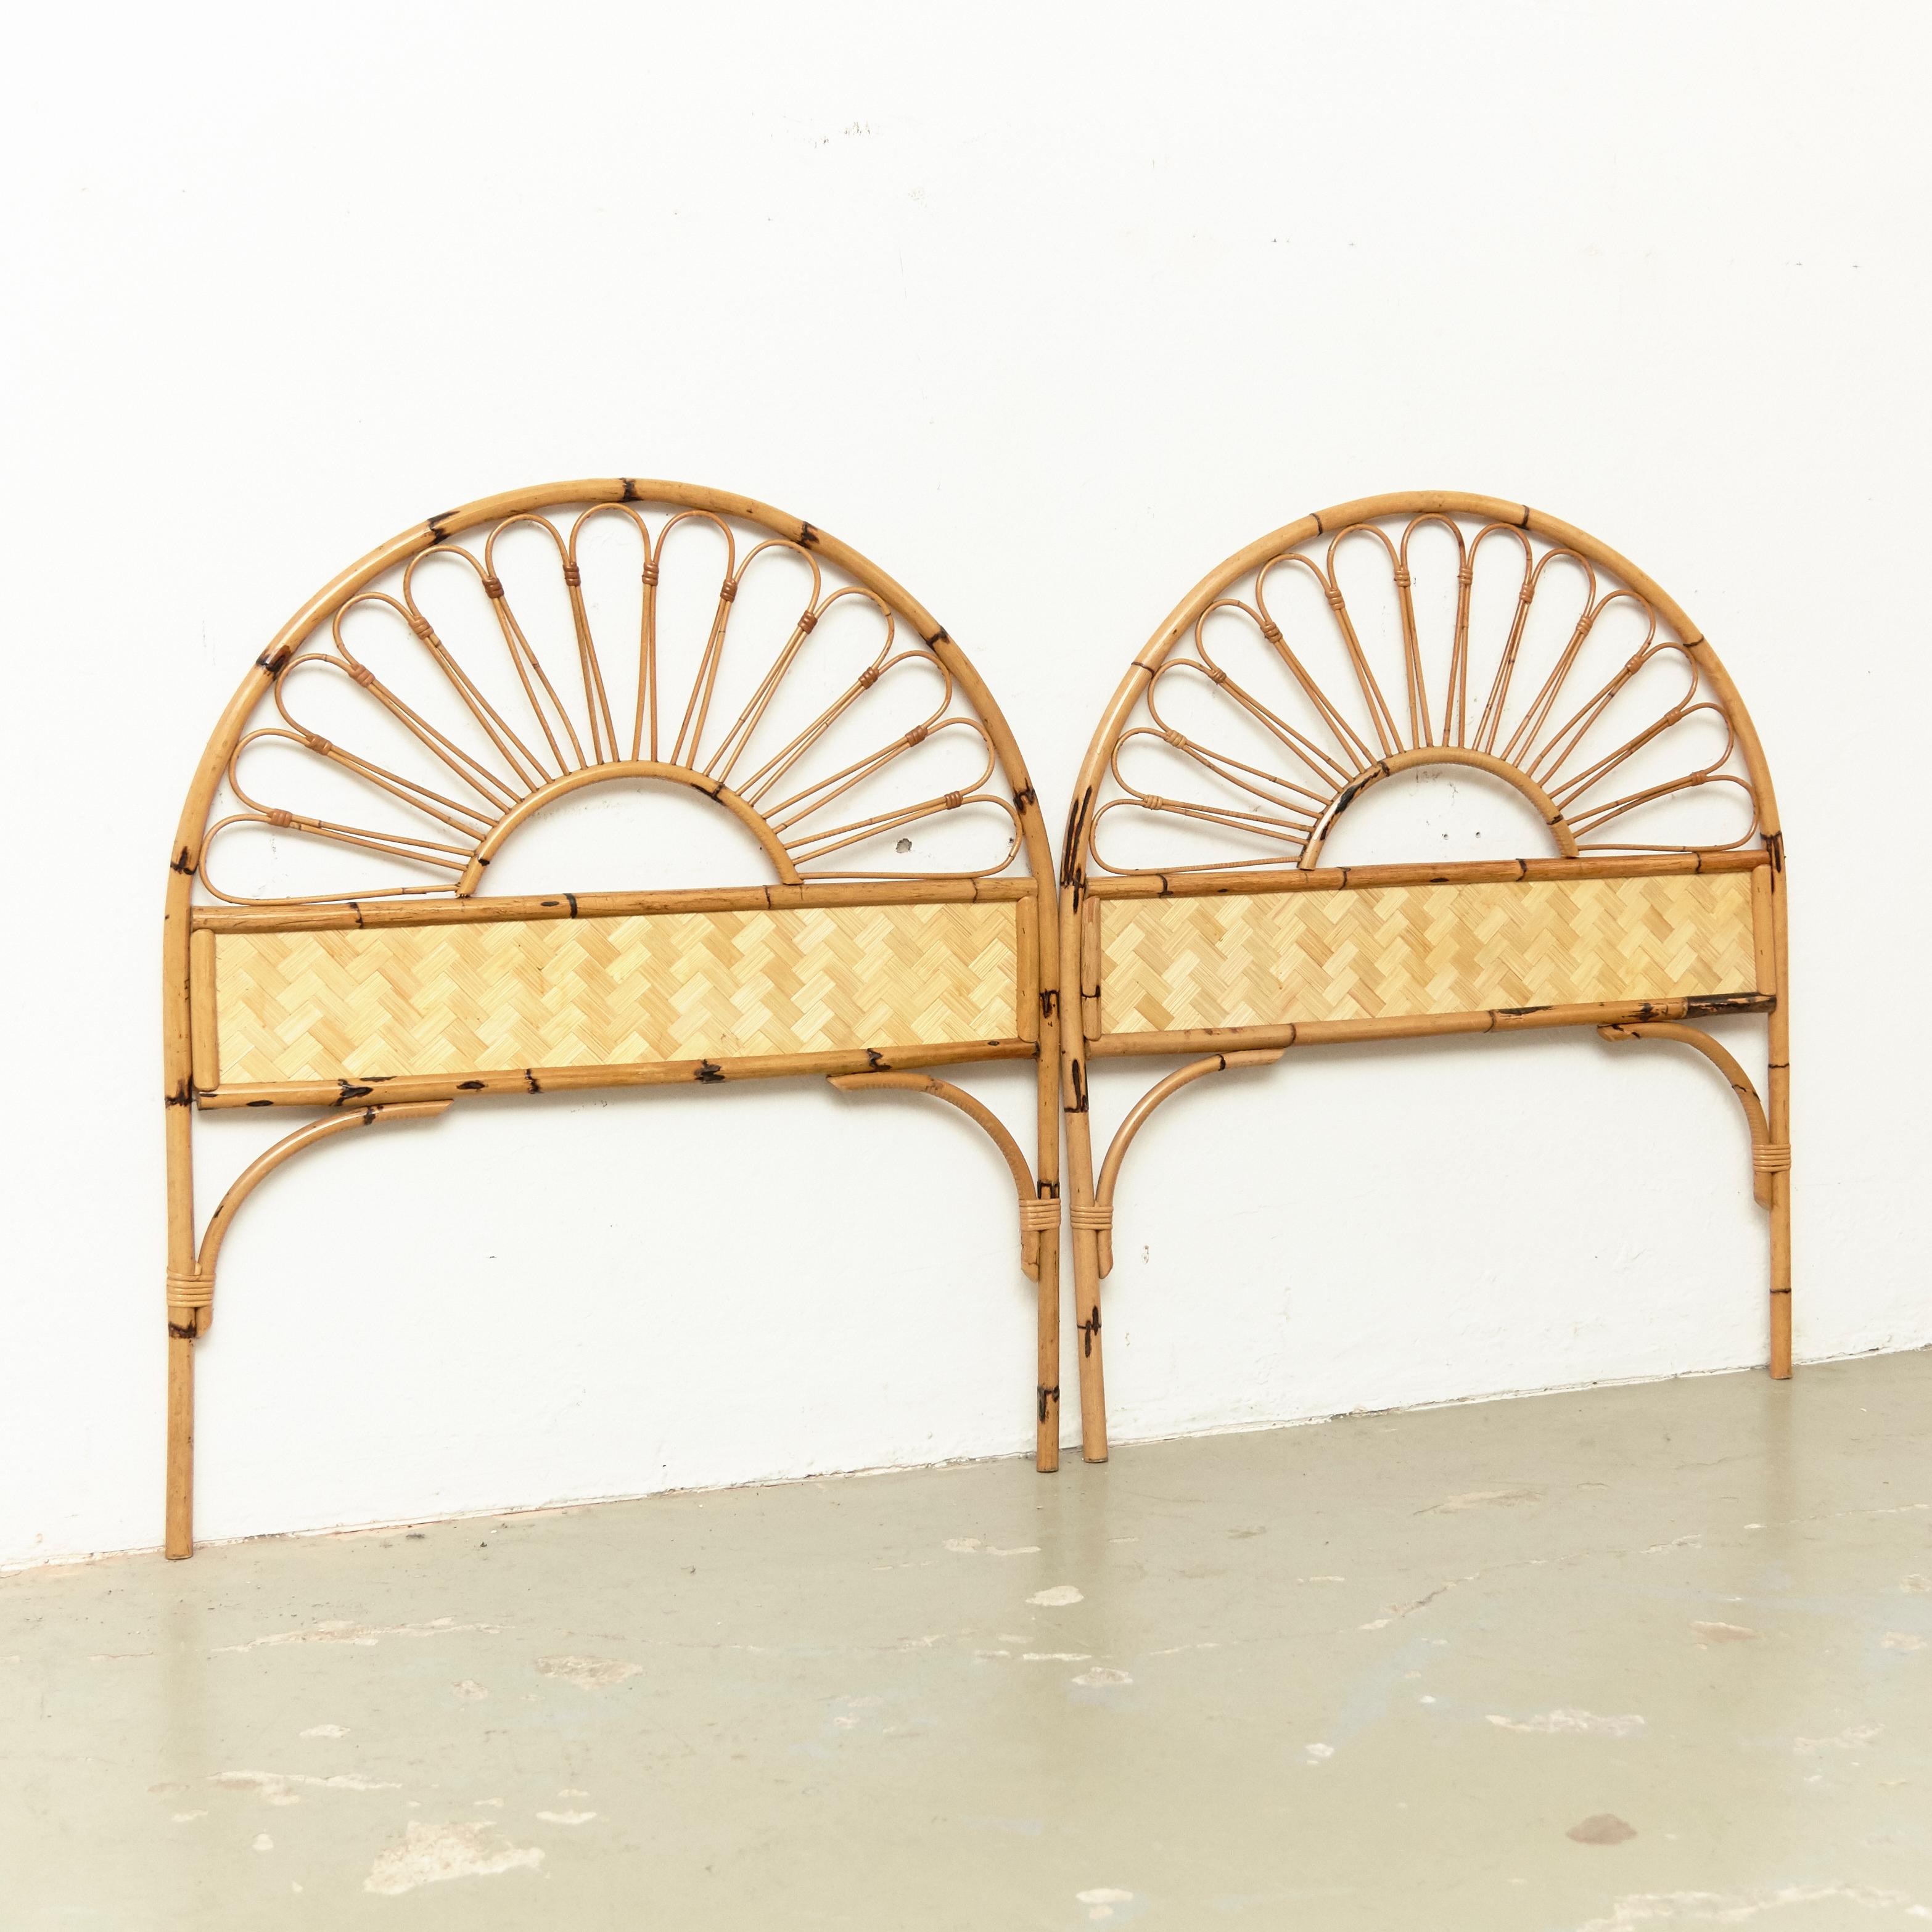 Pair of Mid-Century Modern bamboo and rattan headboard, circa 1960
Traditionally manufactured in France.
By unknown designer.

In original condition with minor wear consistent of age and use, preserving a beautiful patina.